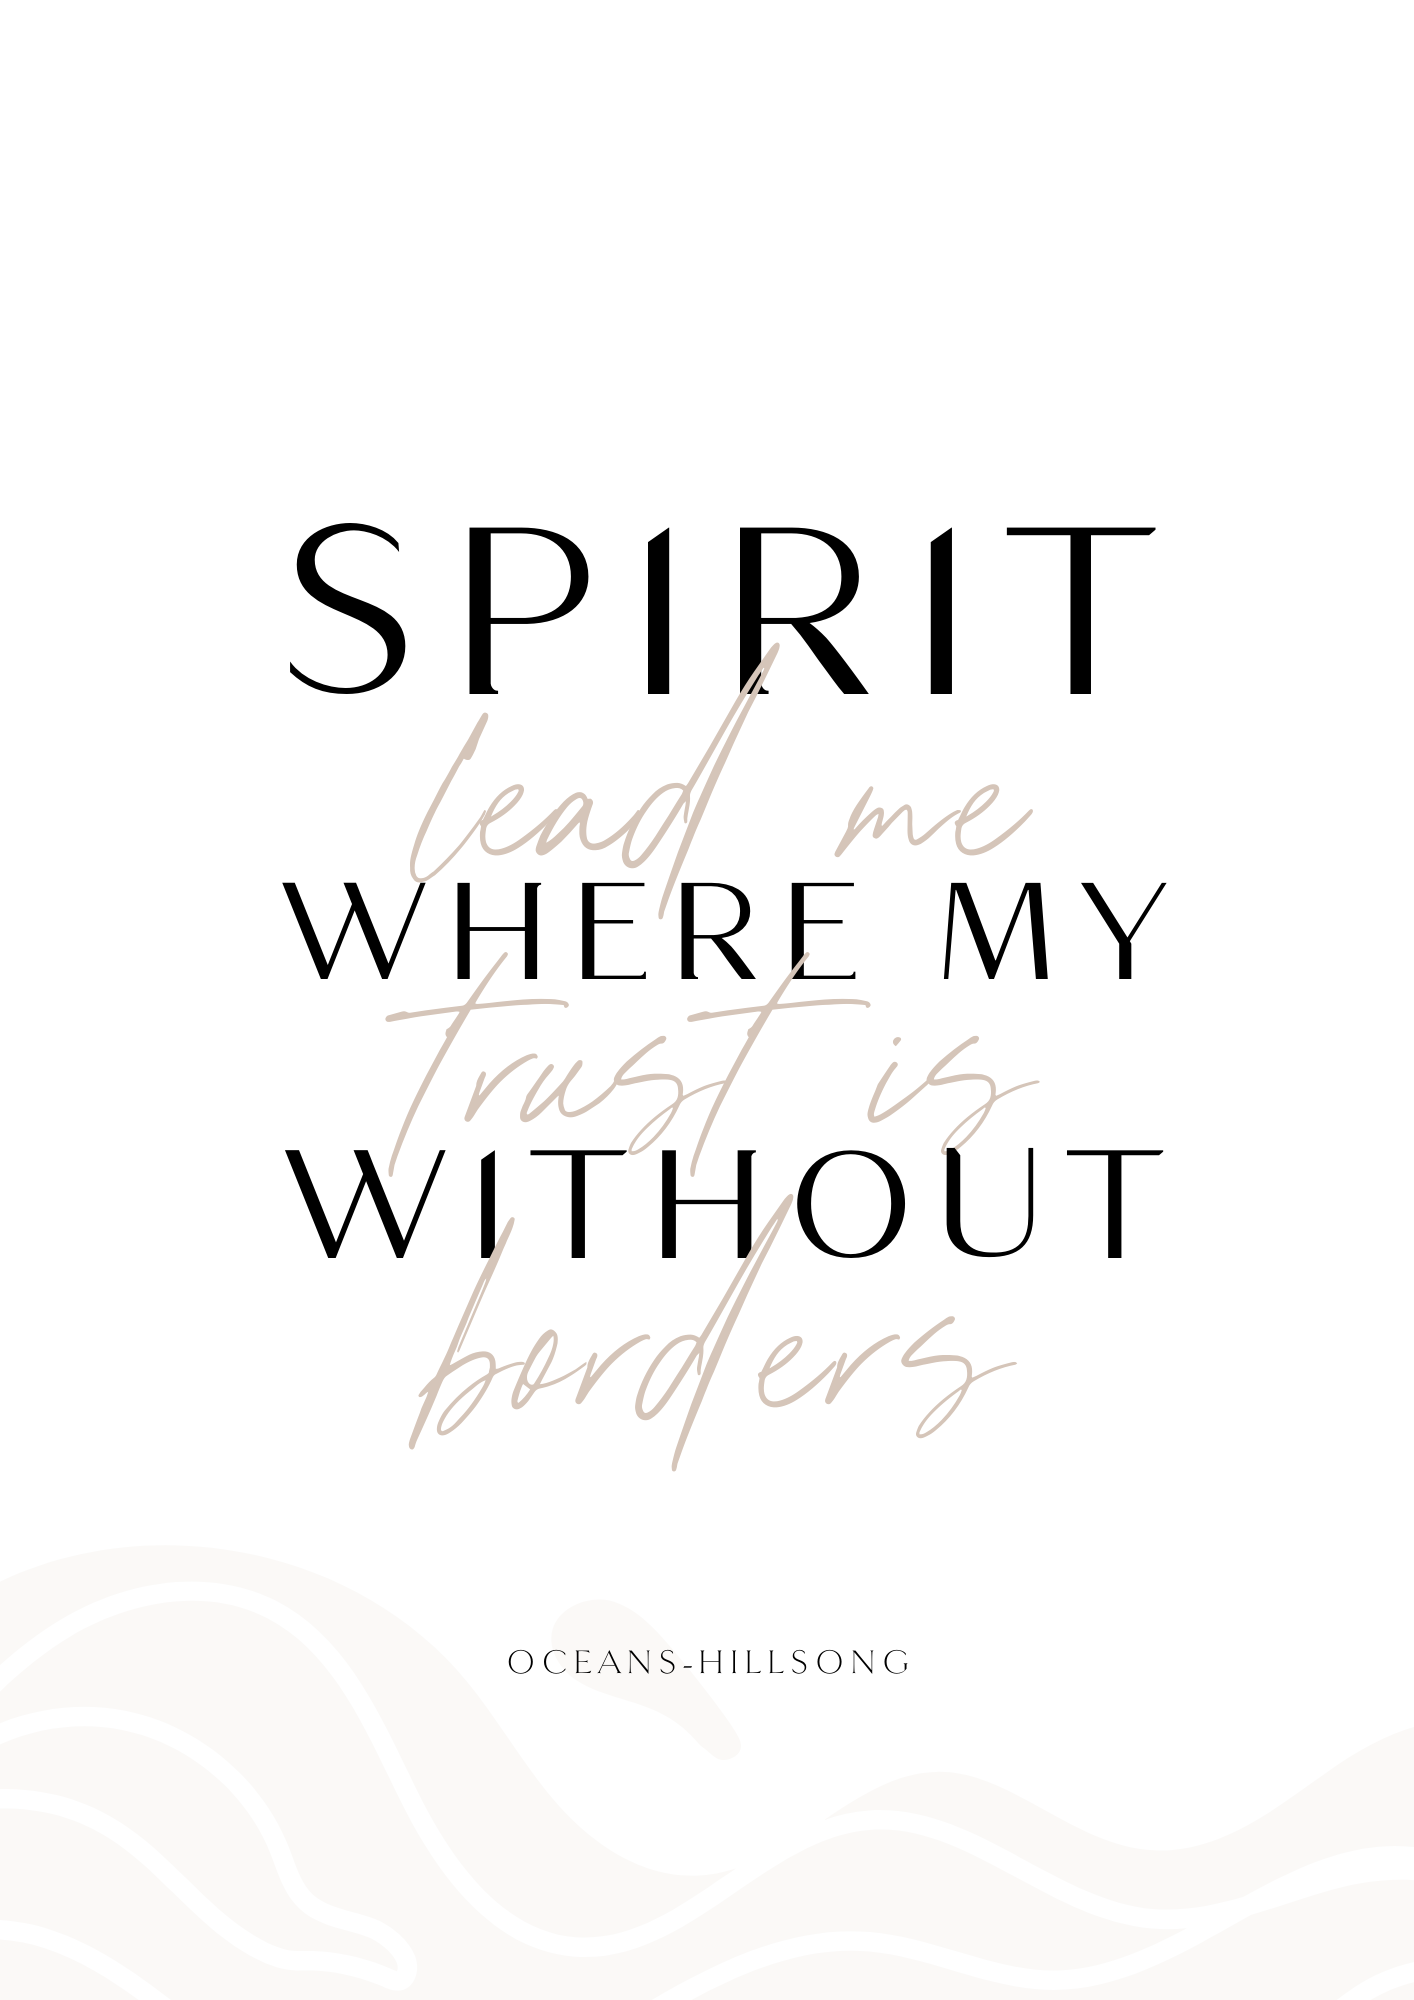 Trust Is Without Boarders -OCEANS BY HILLSONG